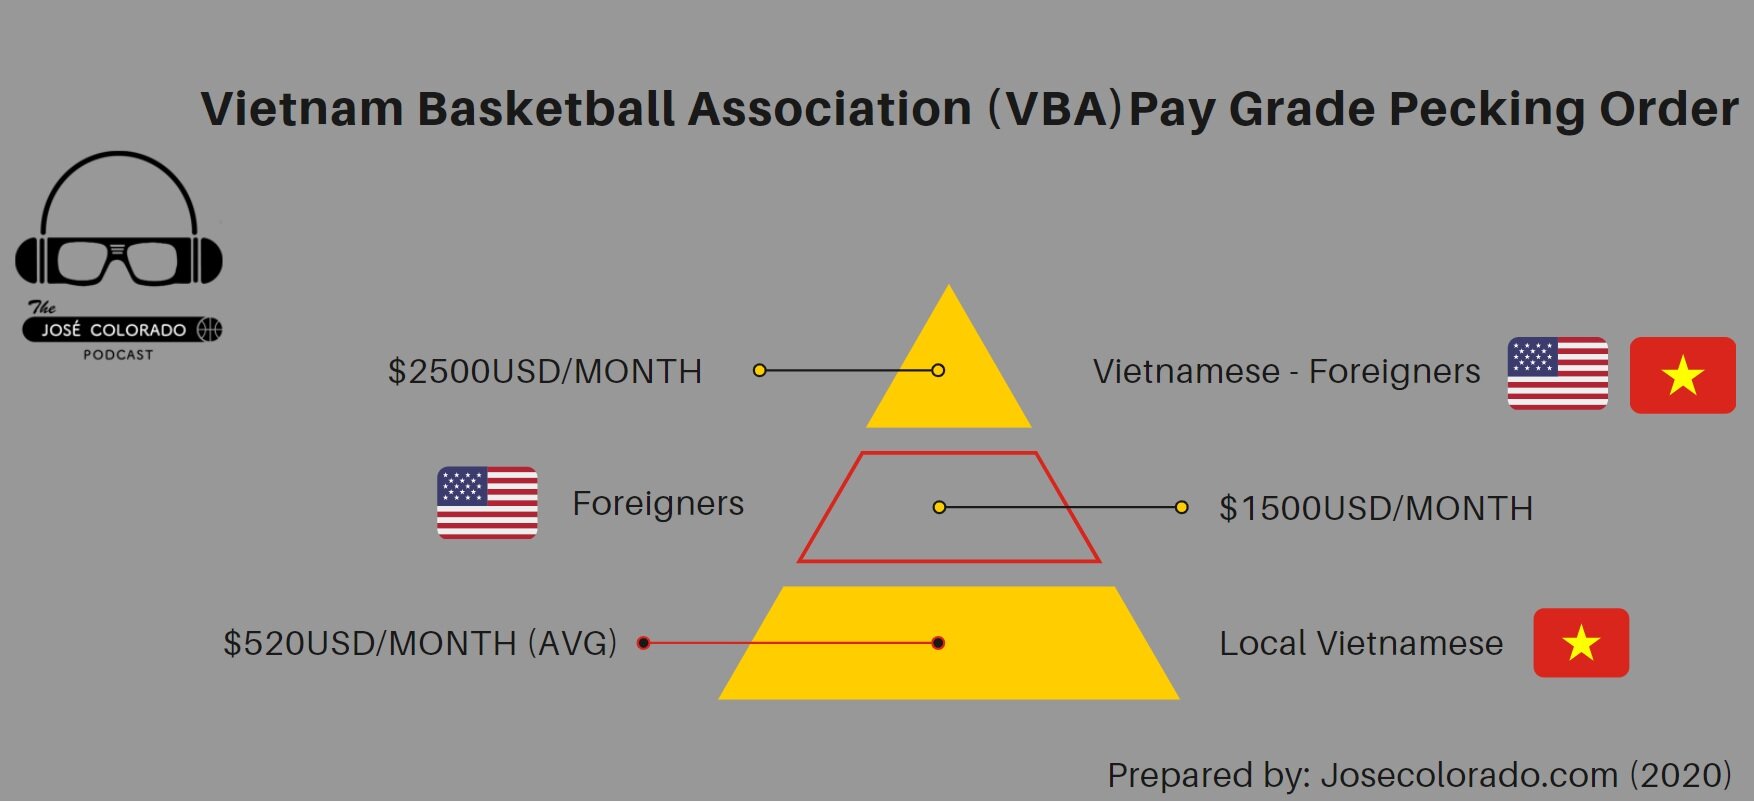 Vietnam’s Professional Basketball salaries pay Vietnamese-foreigners the most.